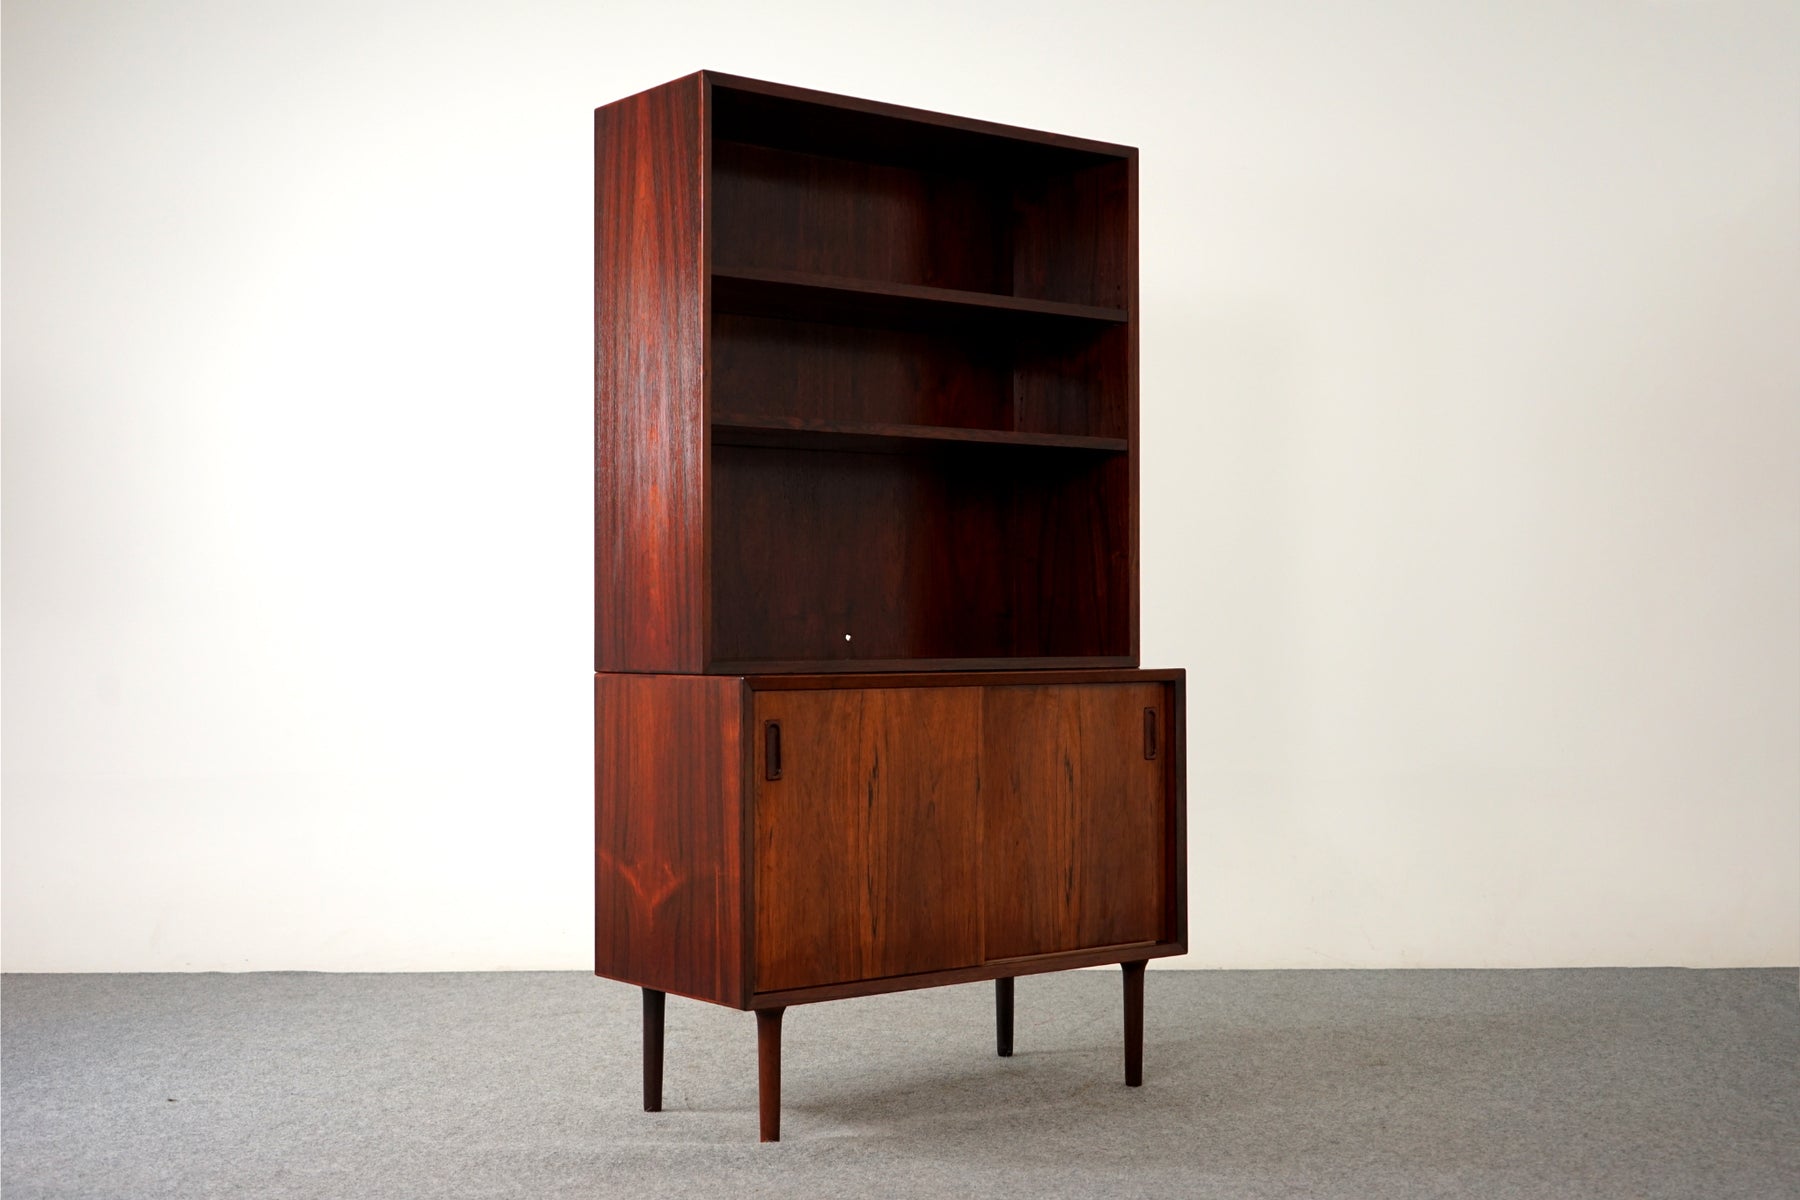 SALE - Rosewood Bookcase/Cabinet - (319-047.1)